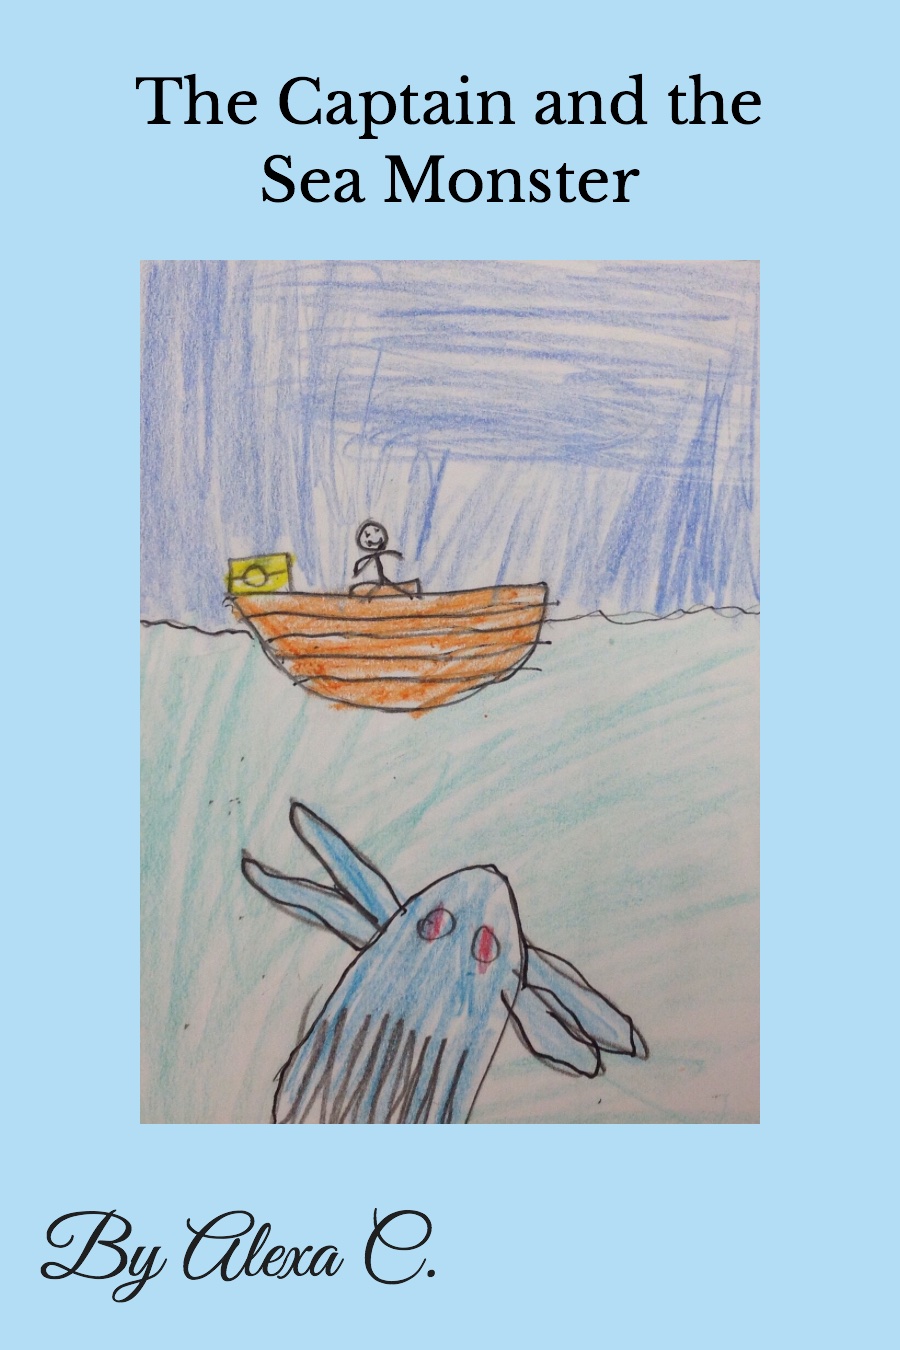 The Captain And The Sea Monster by Alexa C